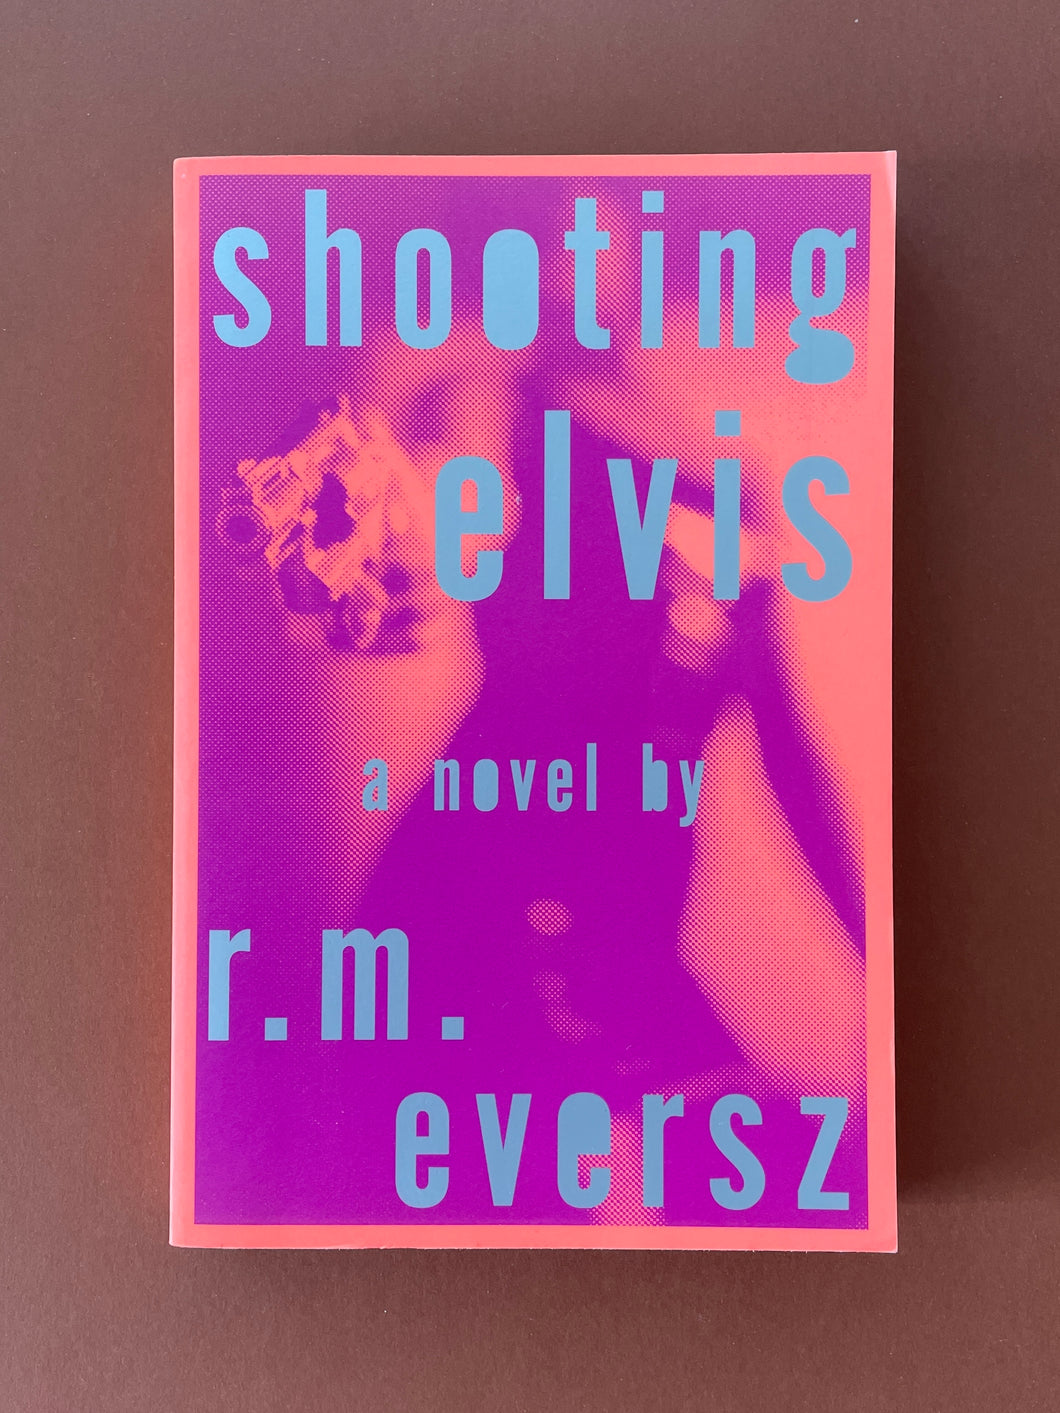 Shooting Elvis by Robert Eversz: photo of the front cover which shows very minor scuff marks along the edges.